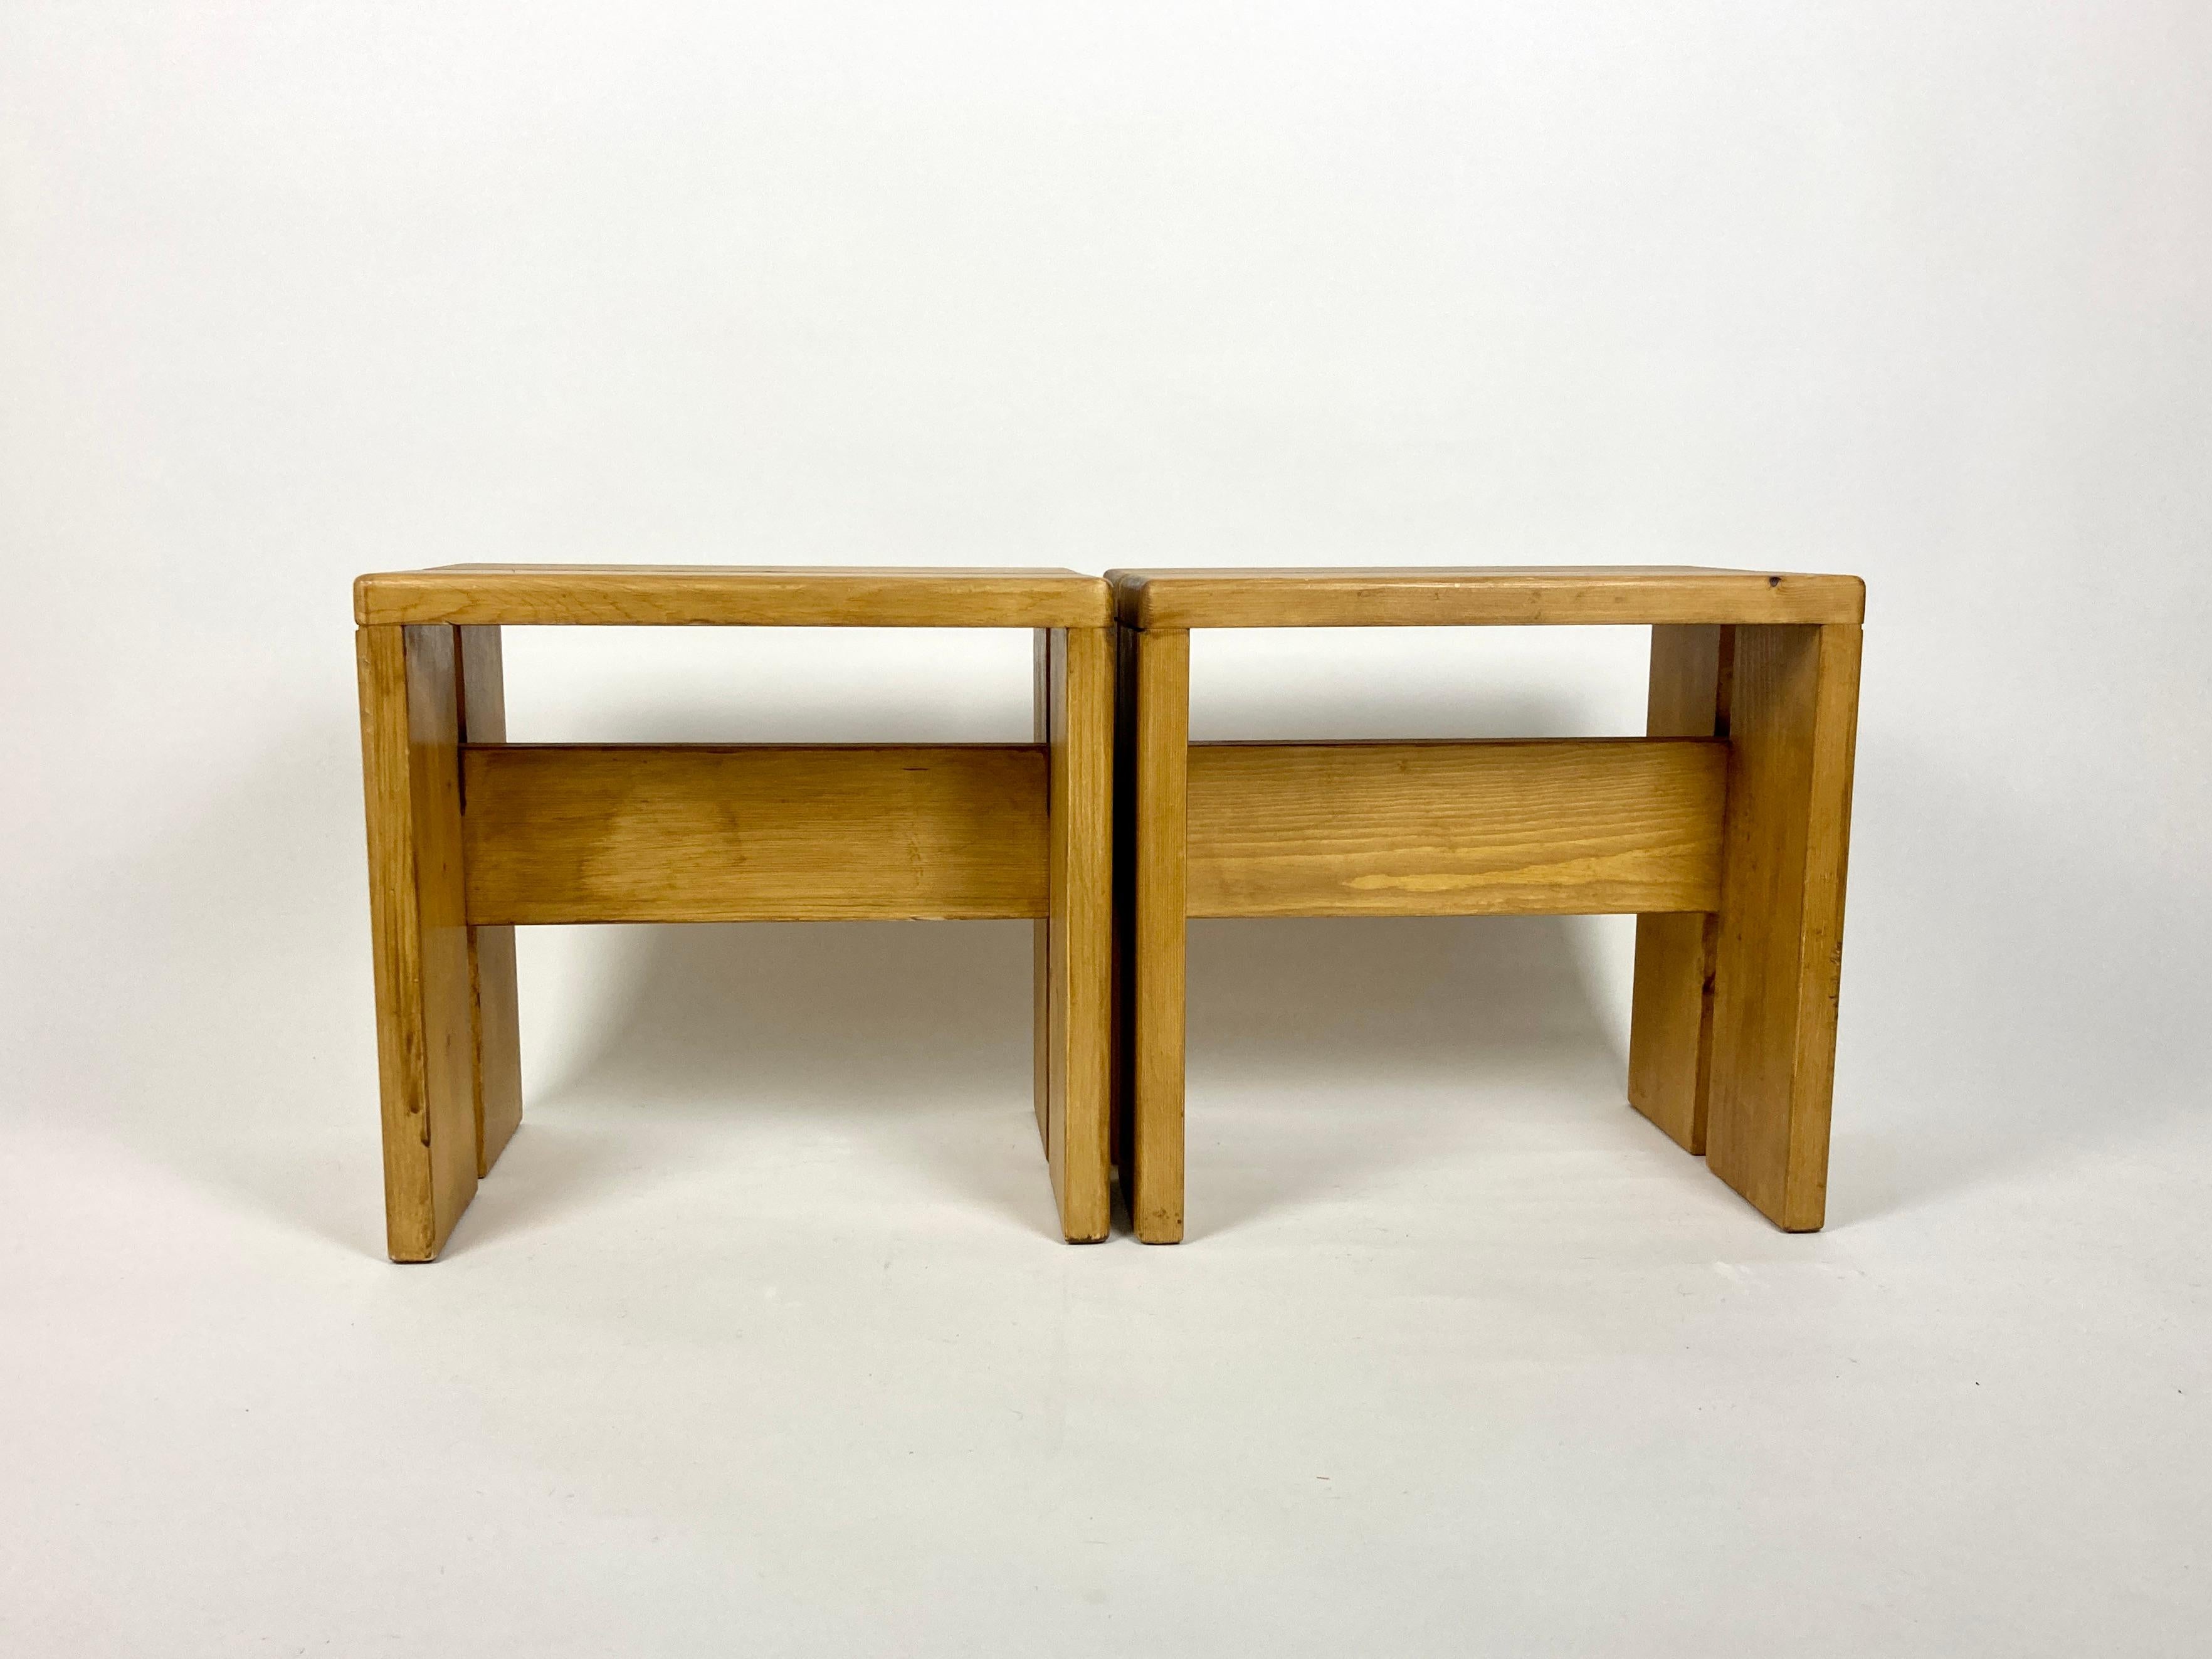 Pine Set of 2 Stools/Side Tables from Les Arcs, France 1970s, Charlotte Perriand